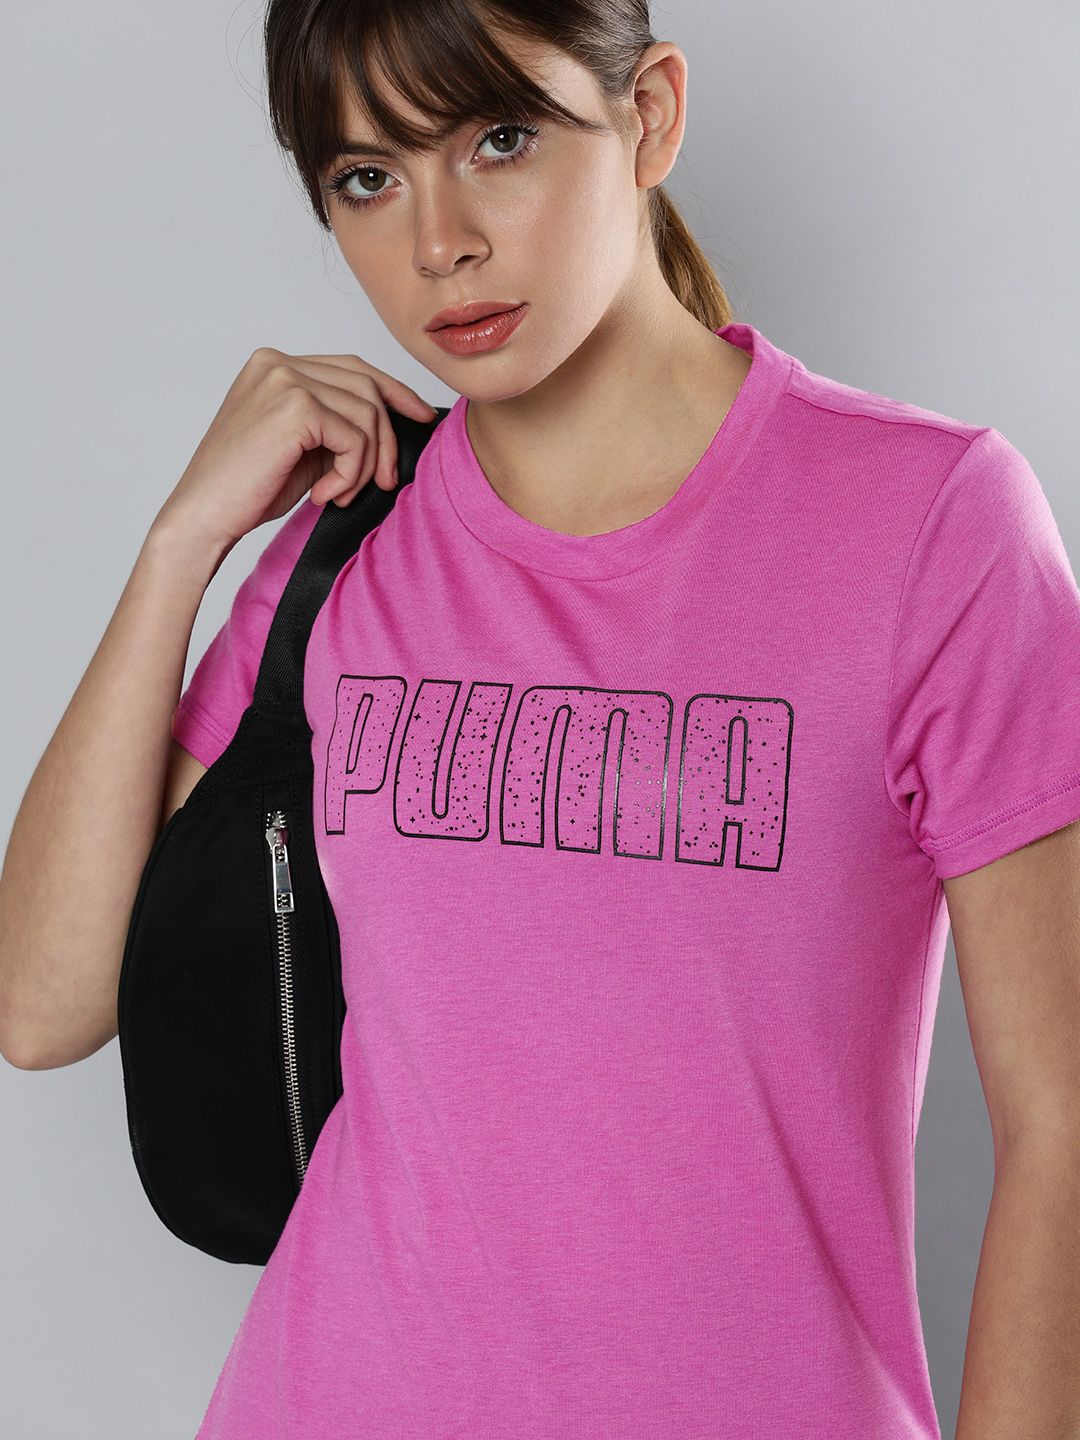 Puma Women Pink & Black Brand Logo Printed DryCell  T-shirt Price in India